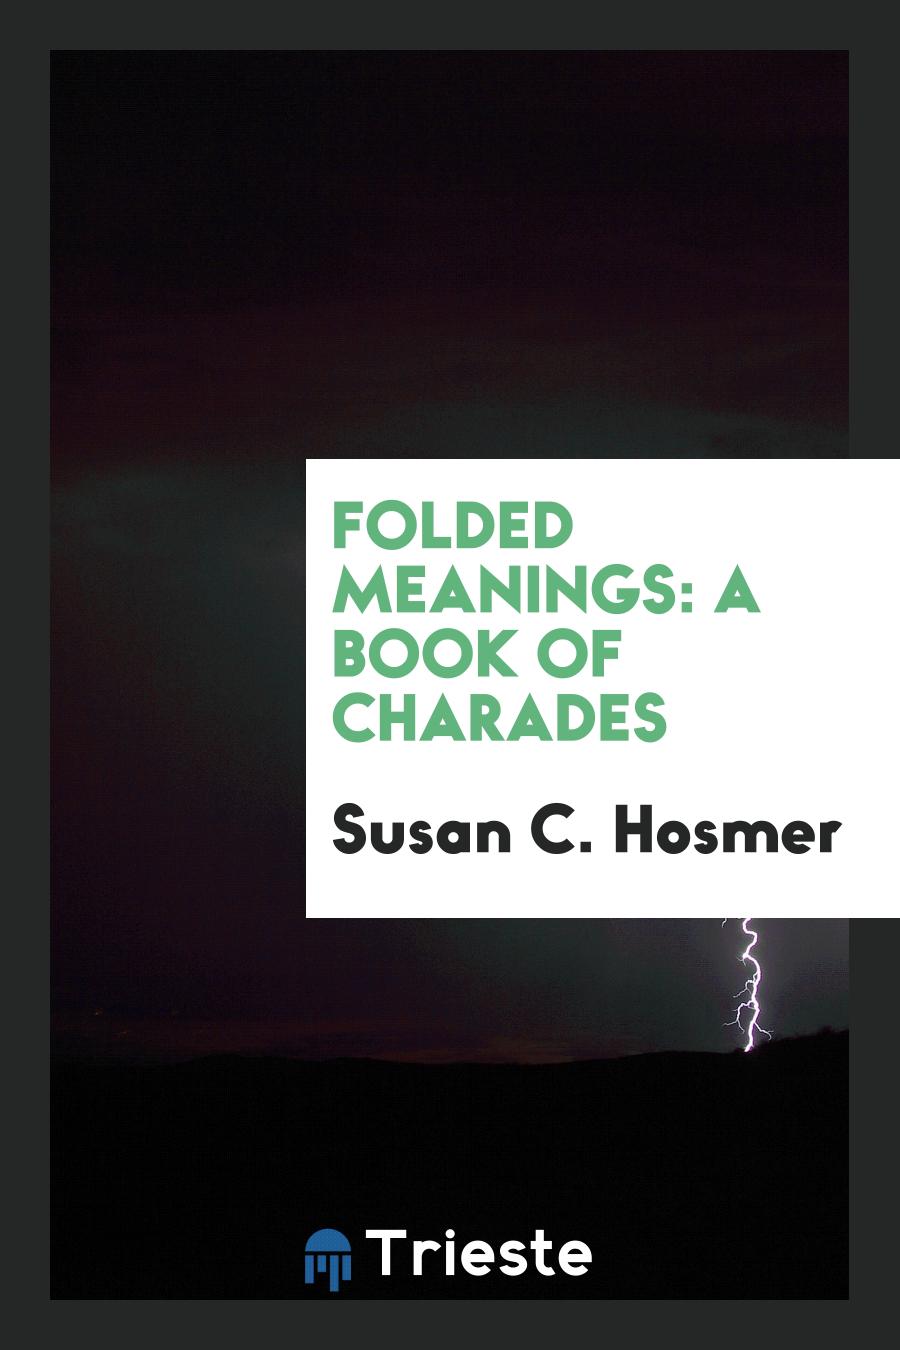 Folded Meanings: A Book of Charades